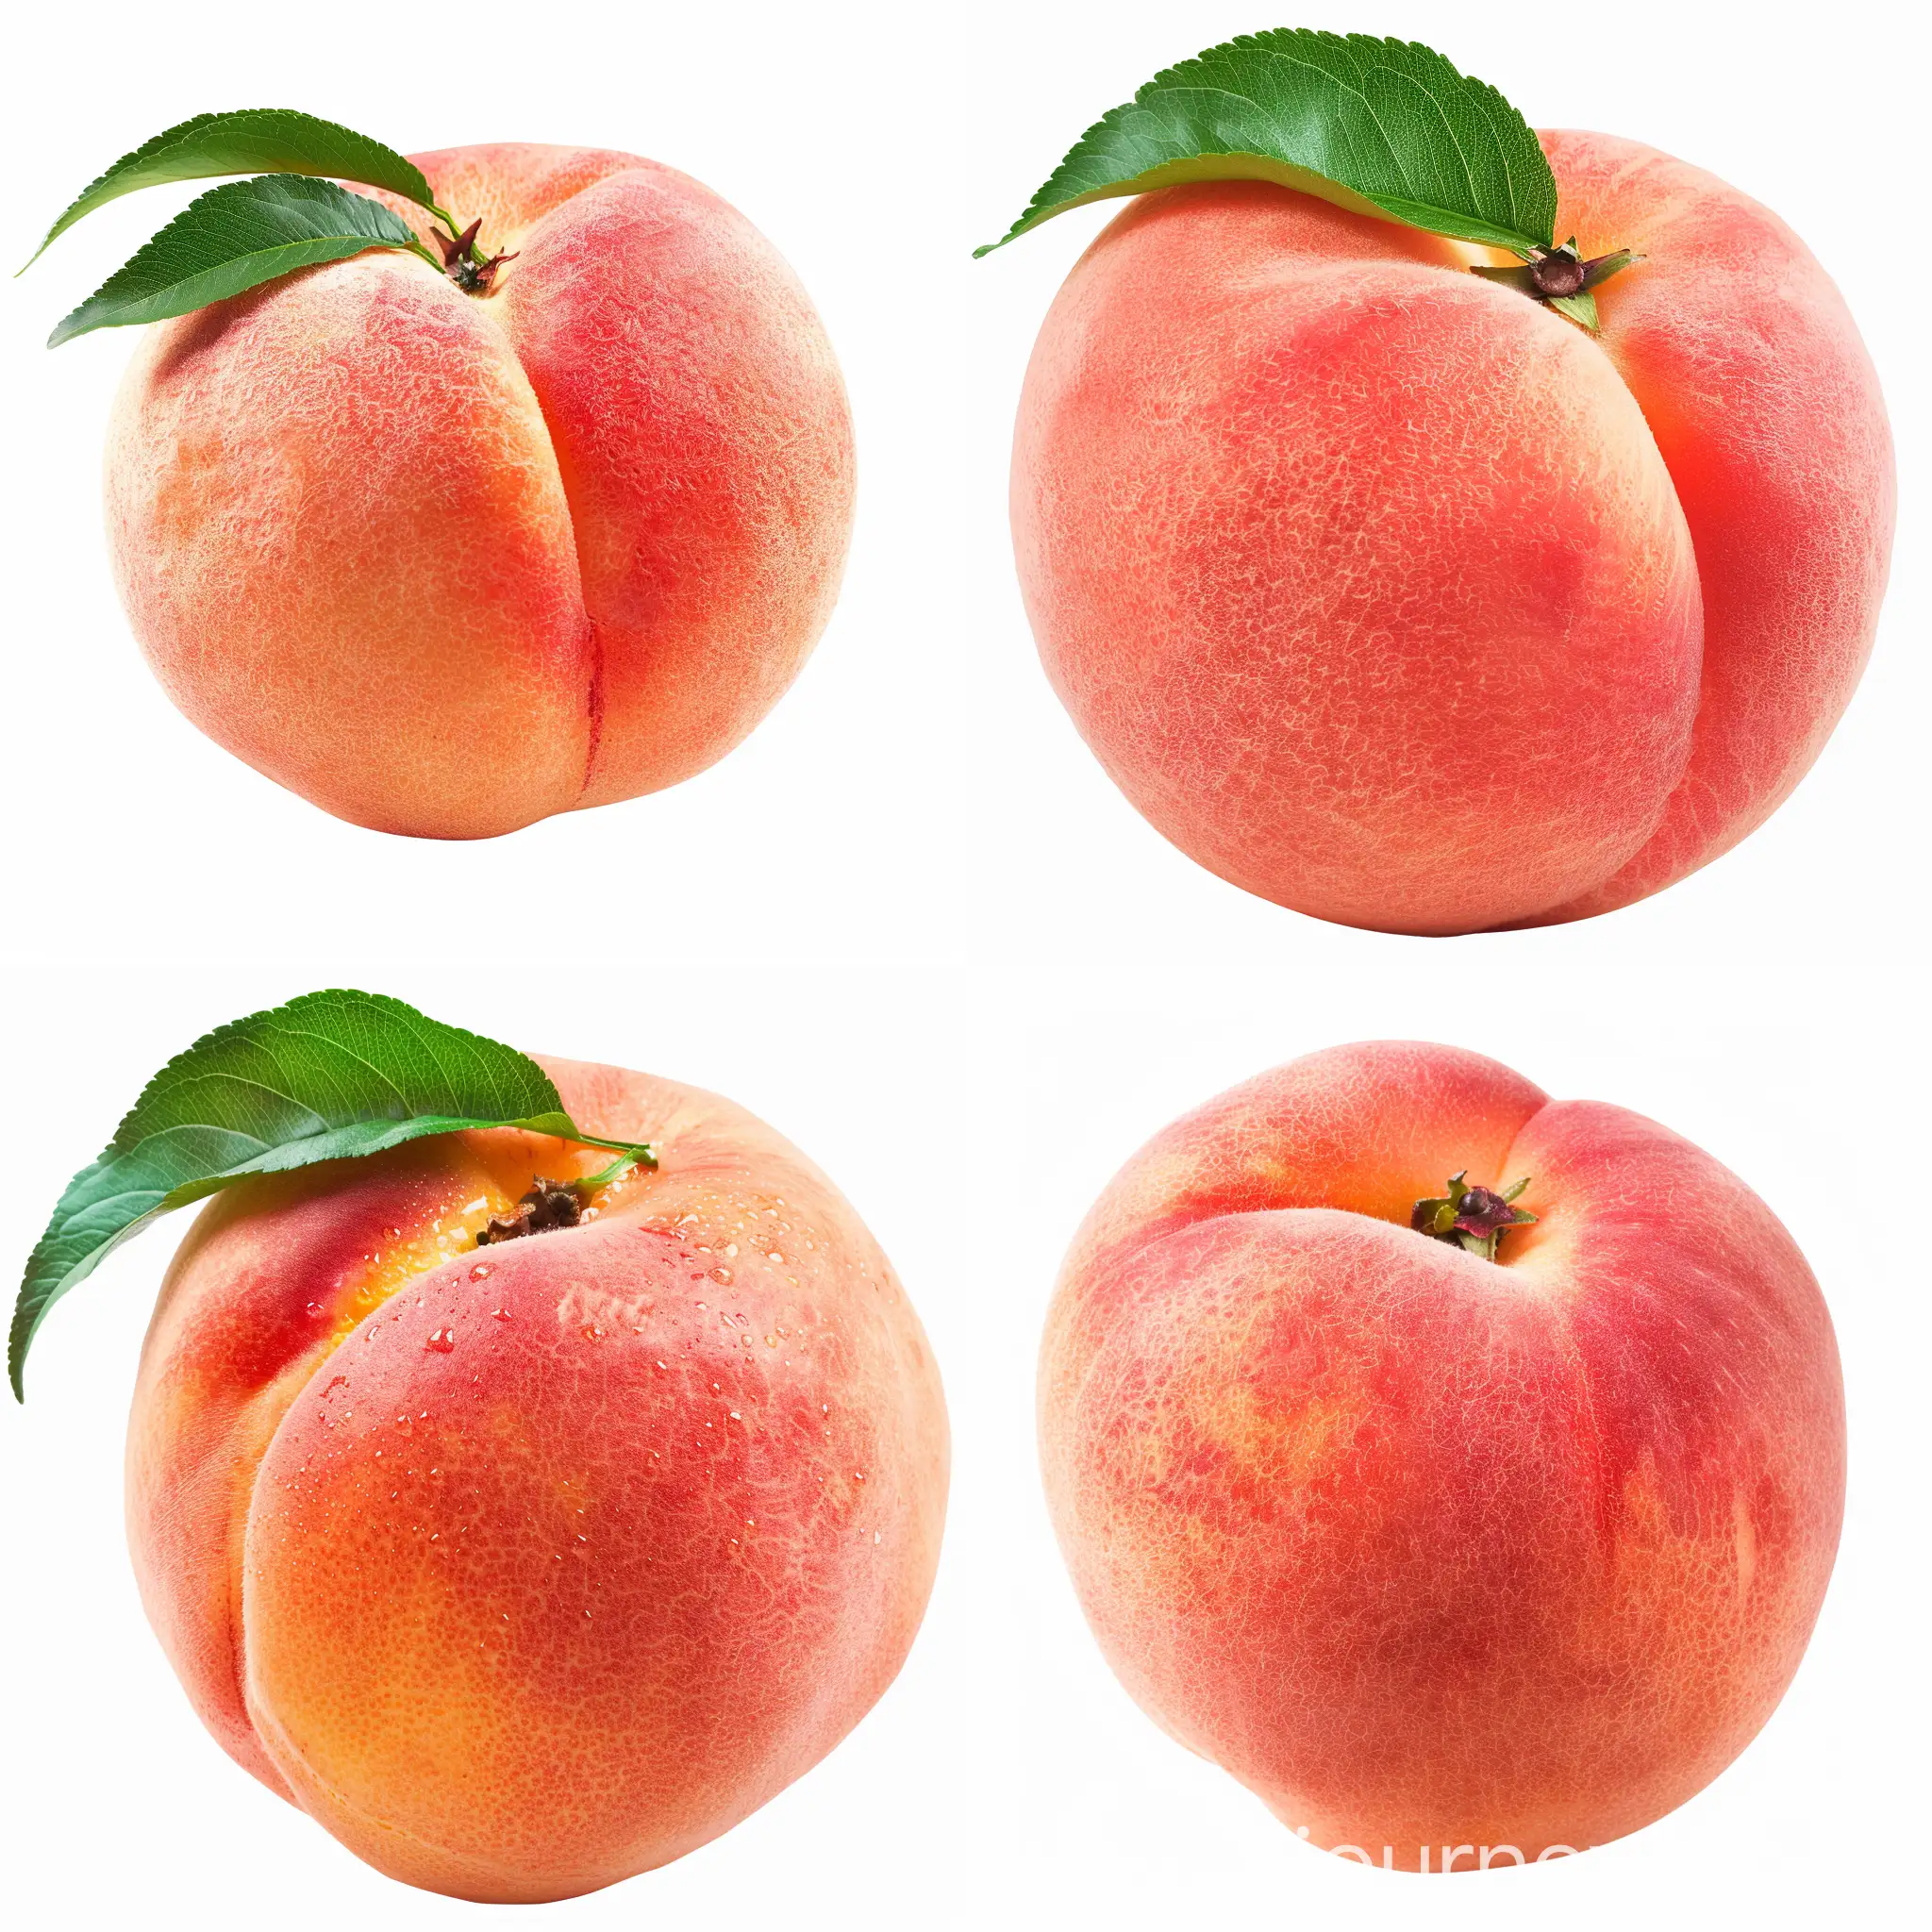 Peach (*png) no background
